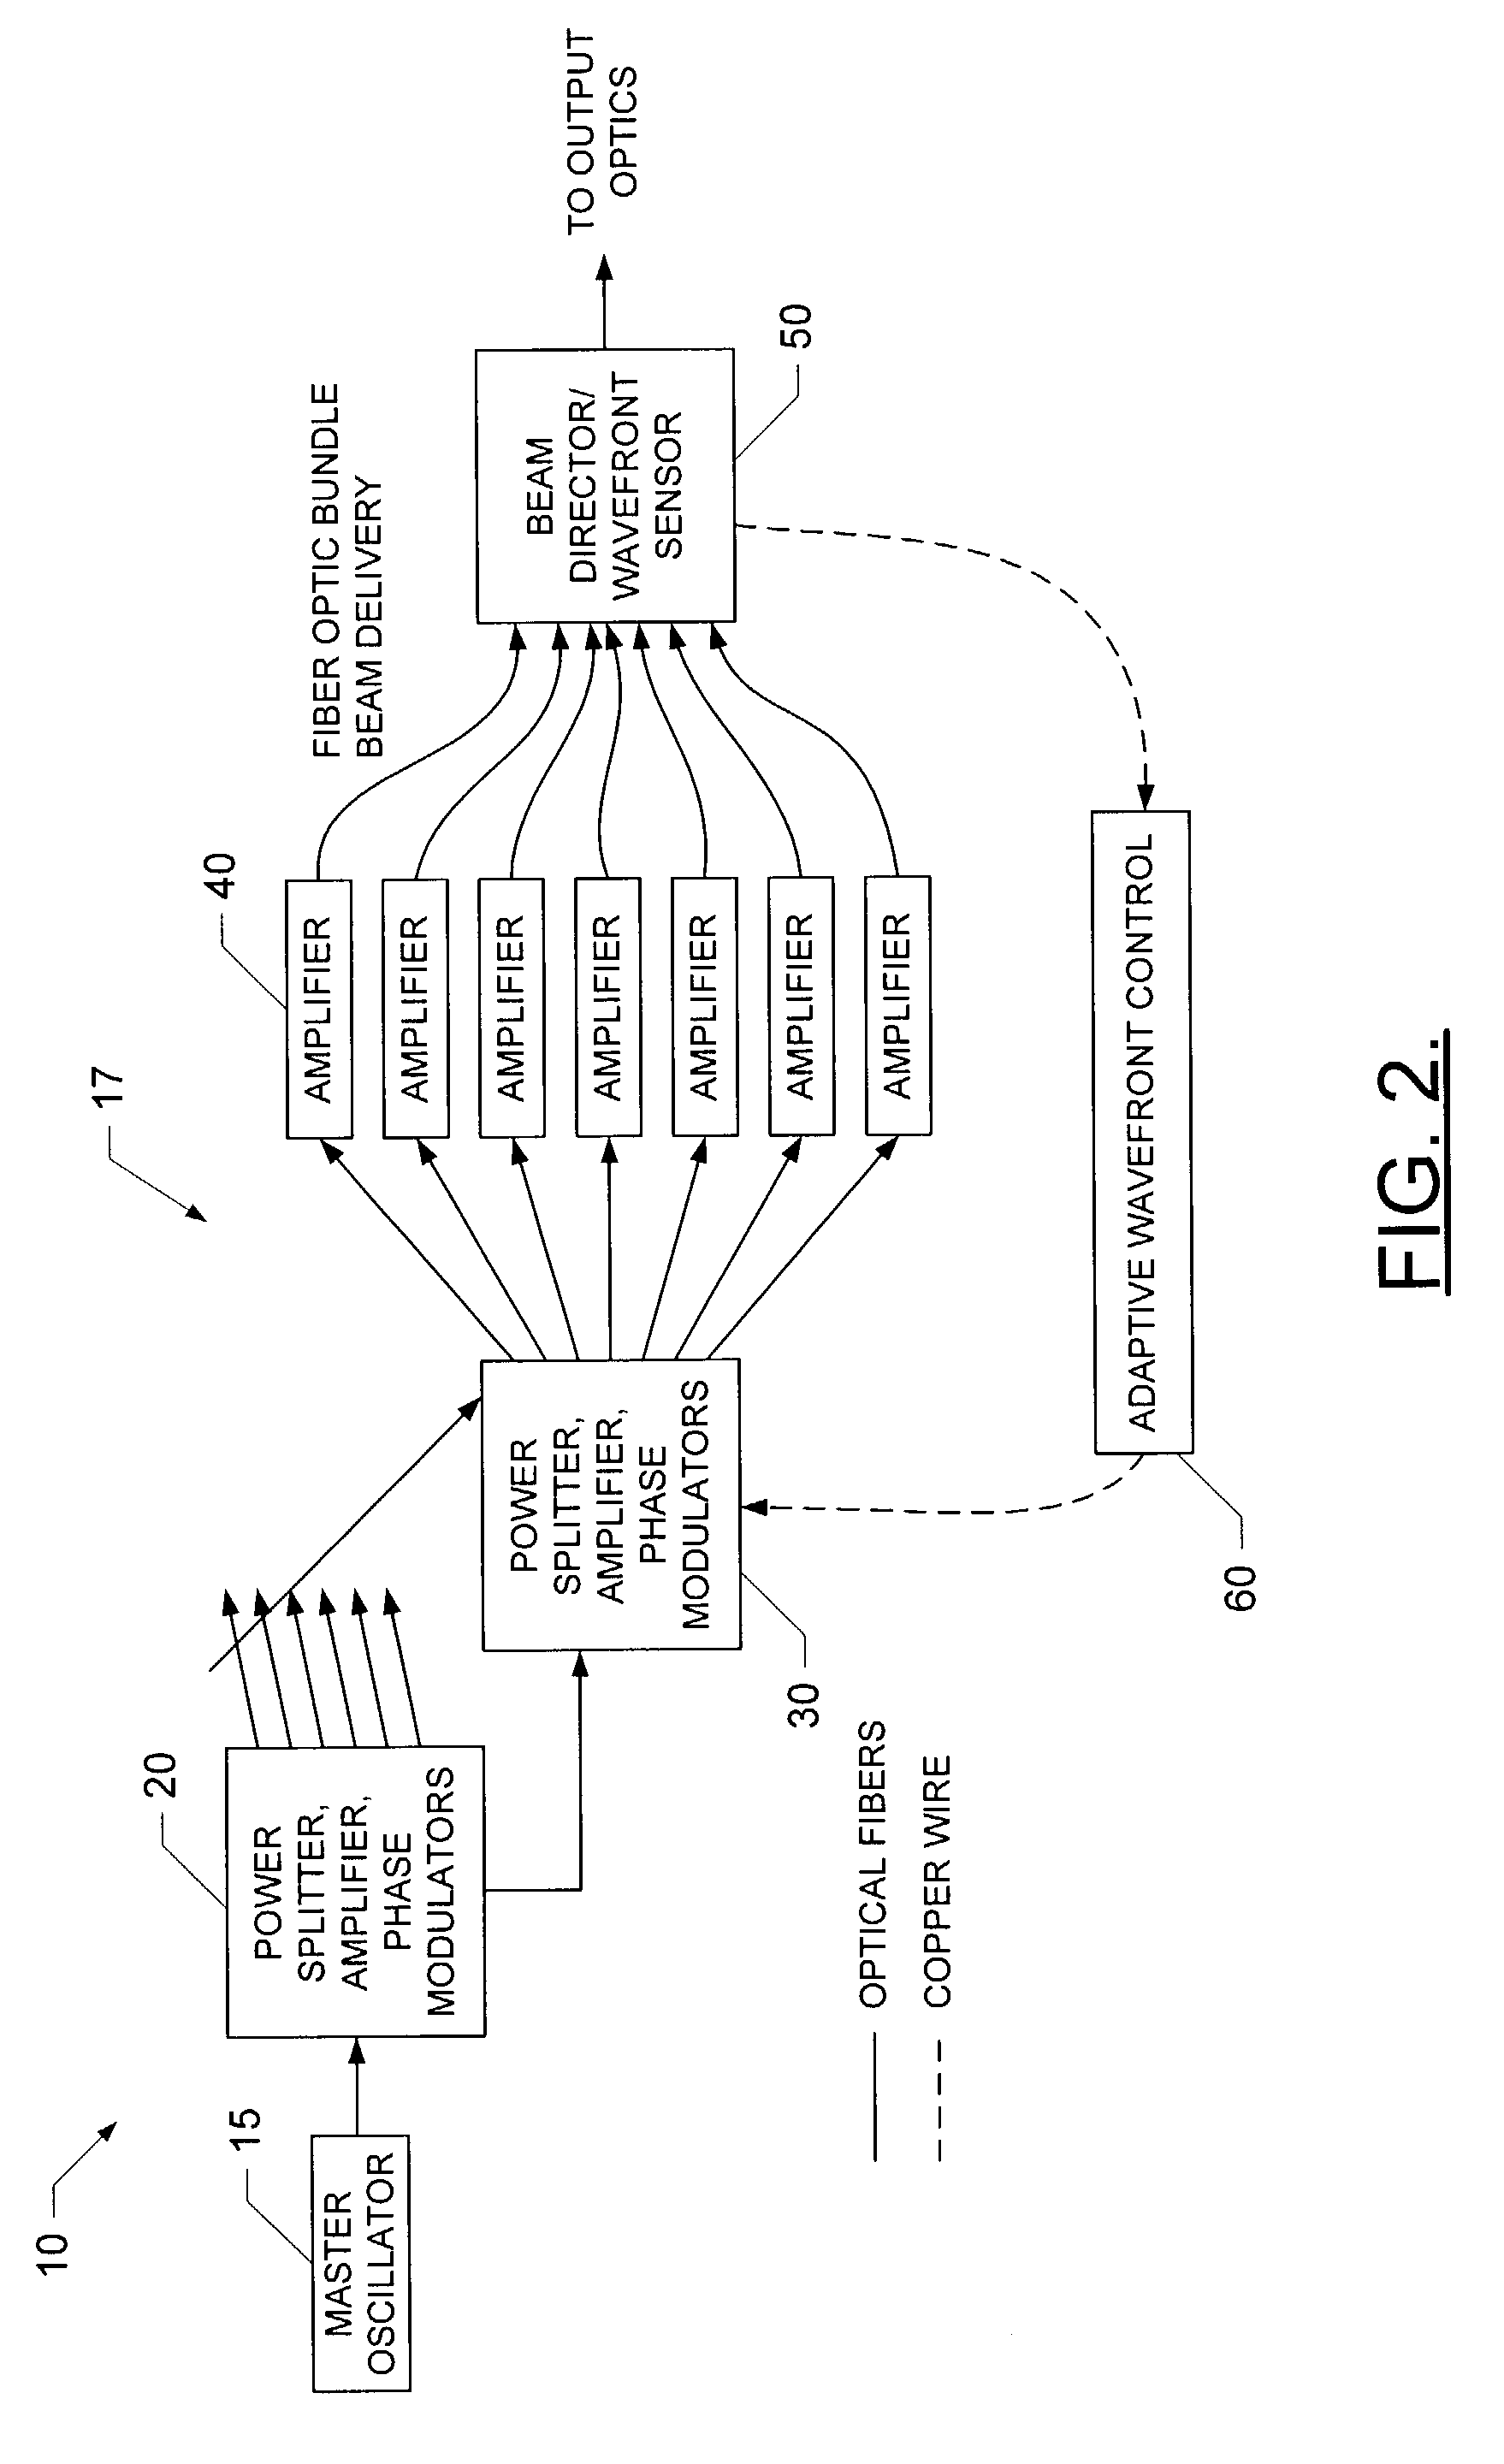 Fiber amplifier having a non-doped inner core and at least one doped gain region